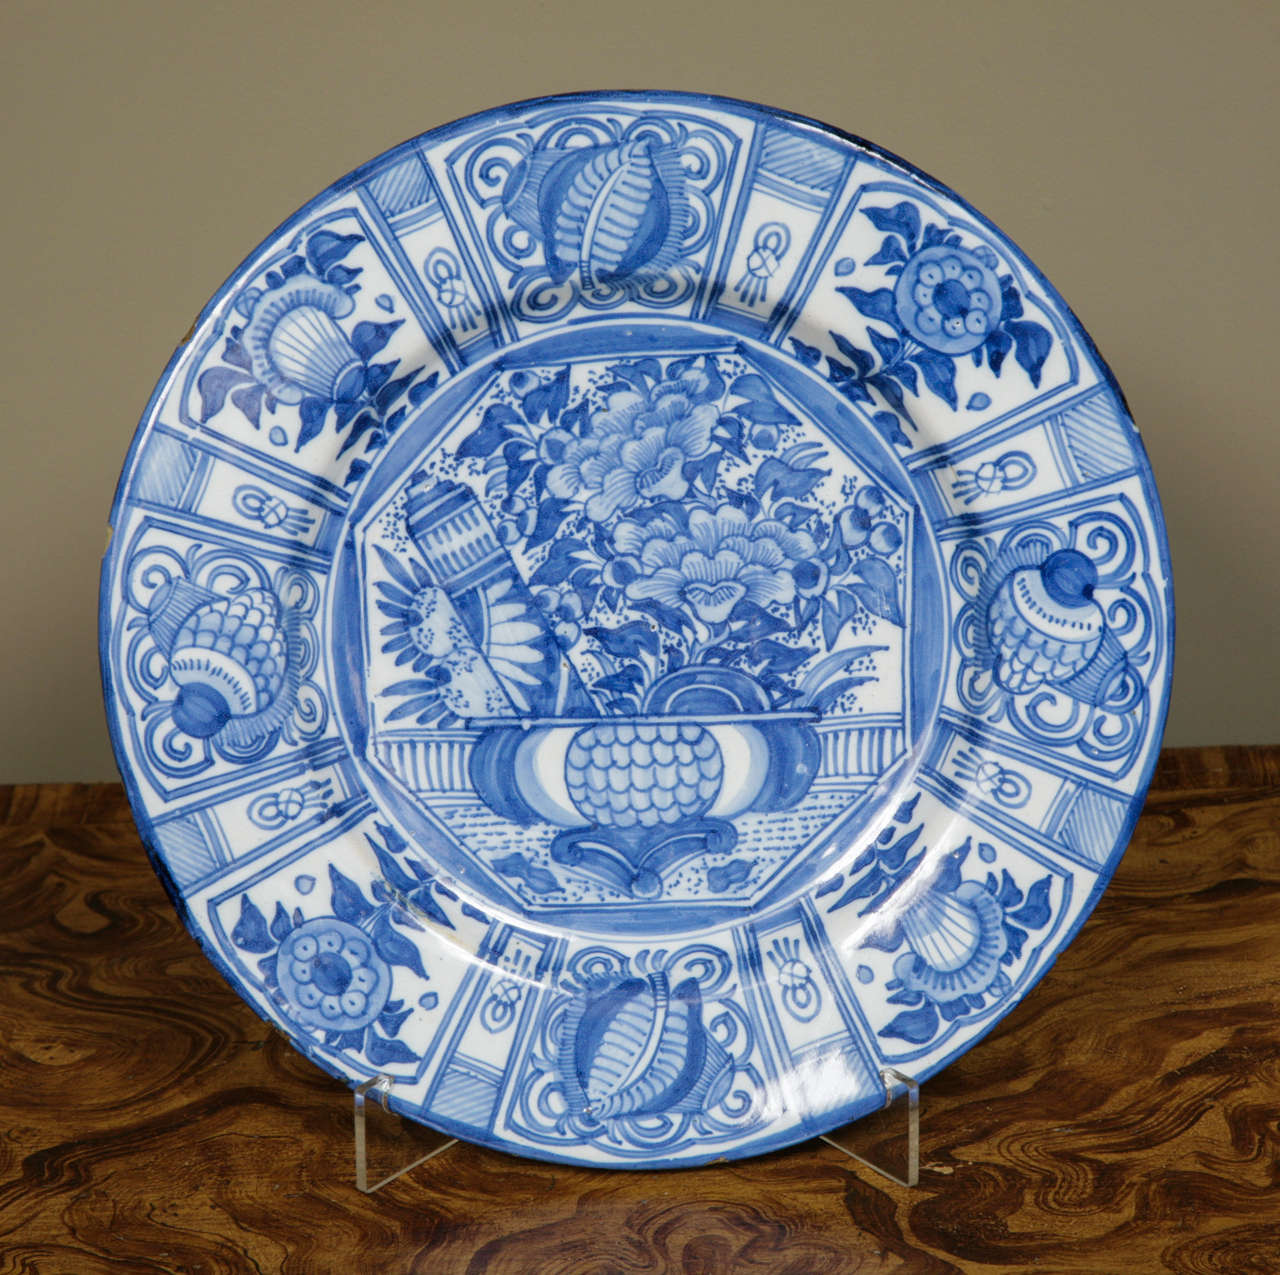 A large early 18th century German Delft style blue & white Kraak style charger. The softer pale blue glaze suggesting possibly Frankfurt. Very well decorated in Kraak motifs showing a bowl containing flowers, a gourd and a scroll central to